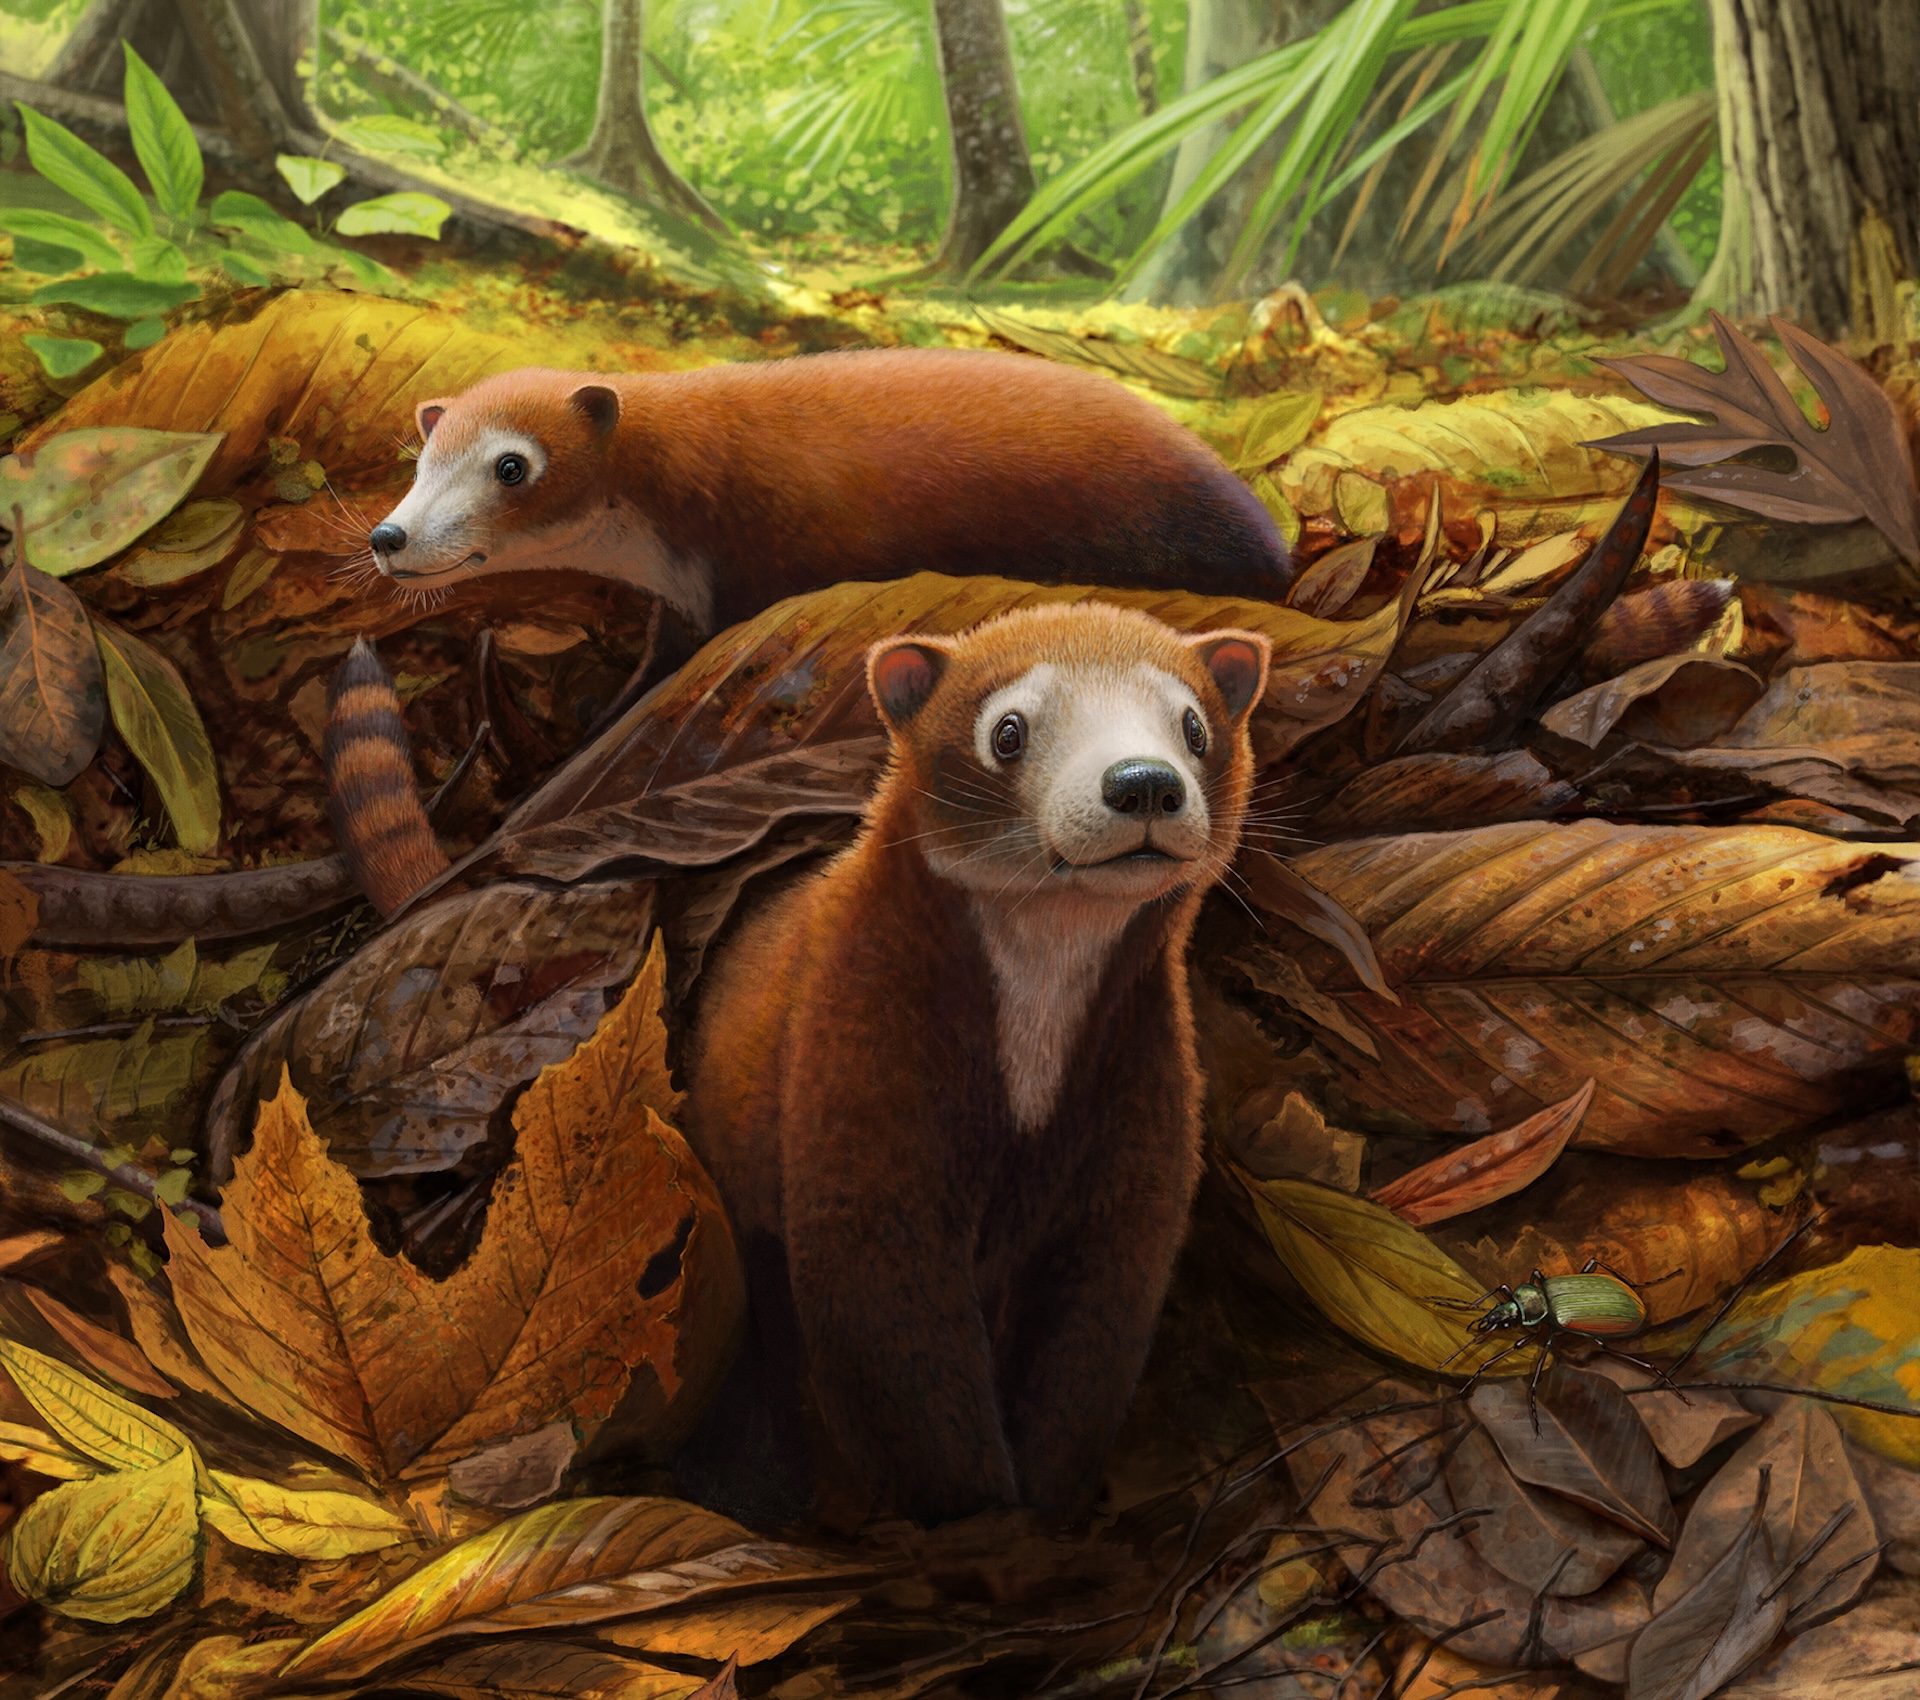 An illustration of two furry creatures in a pile of leaves in the forest.